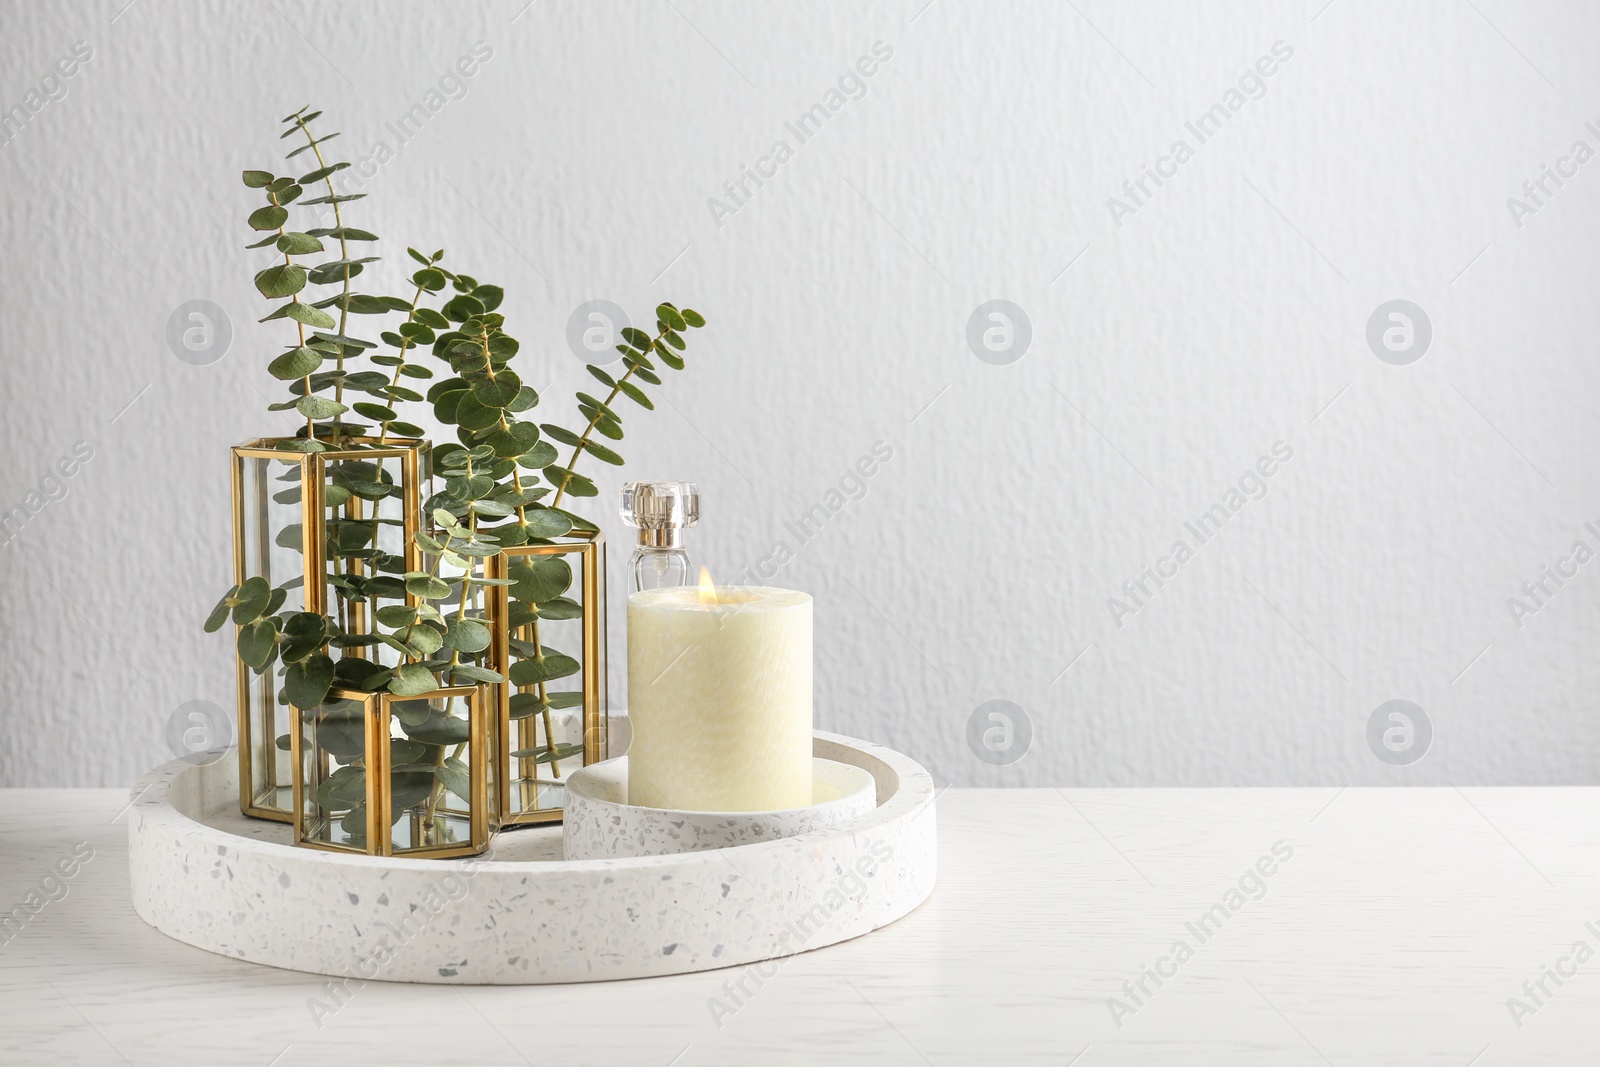 Photo of Stylish tender composition with burning candle and plants on white wooden table against light background, space for text. Cozy interior element